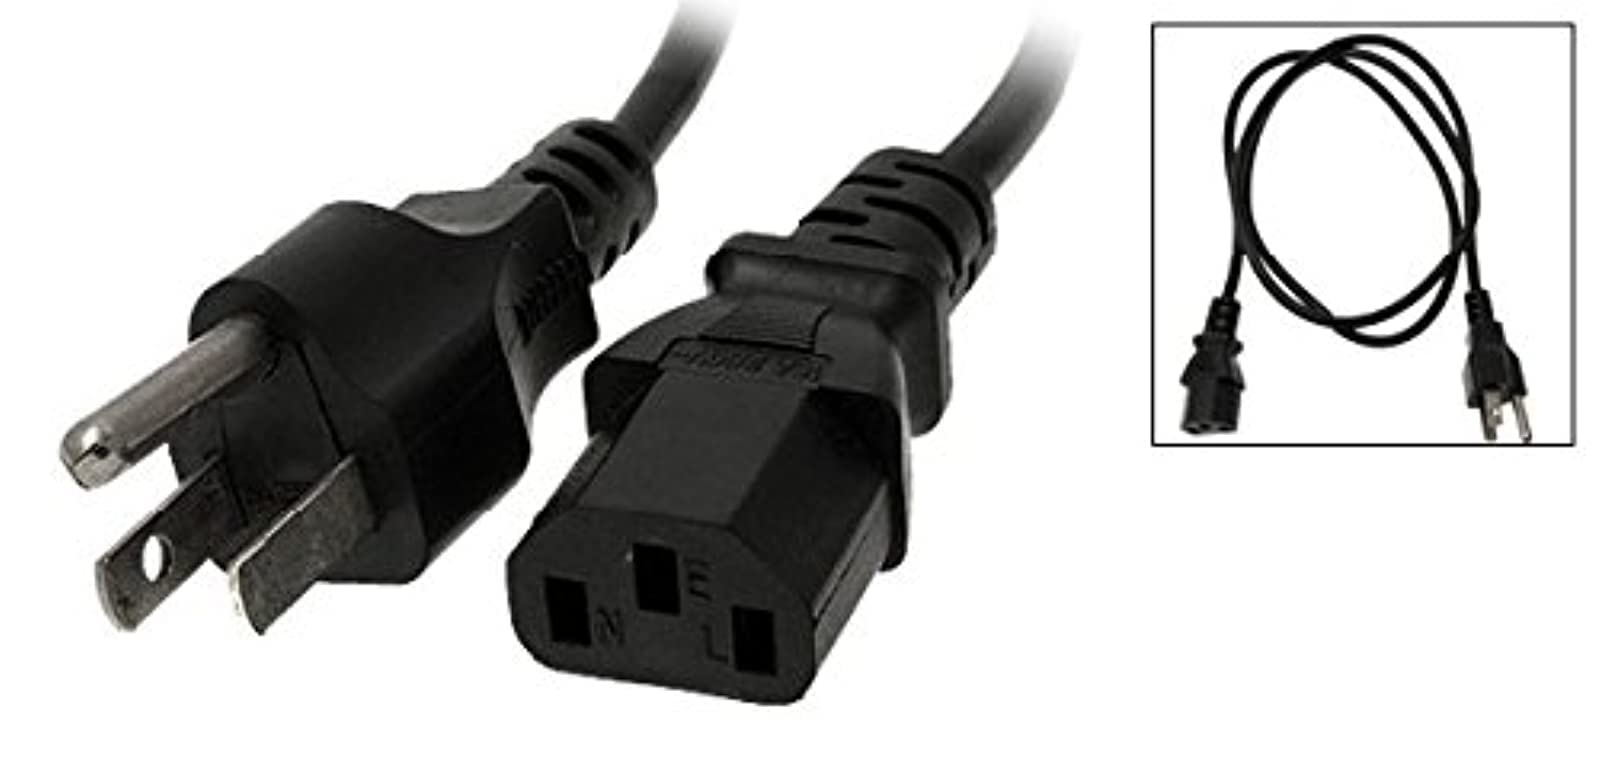 SONY PLAYSTATION 3 Power Cord AC Cable